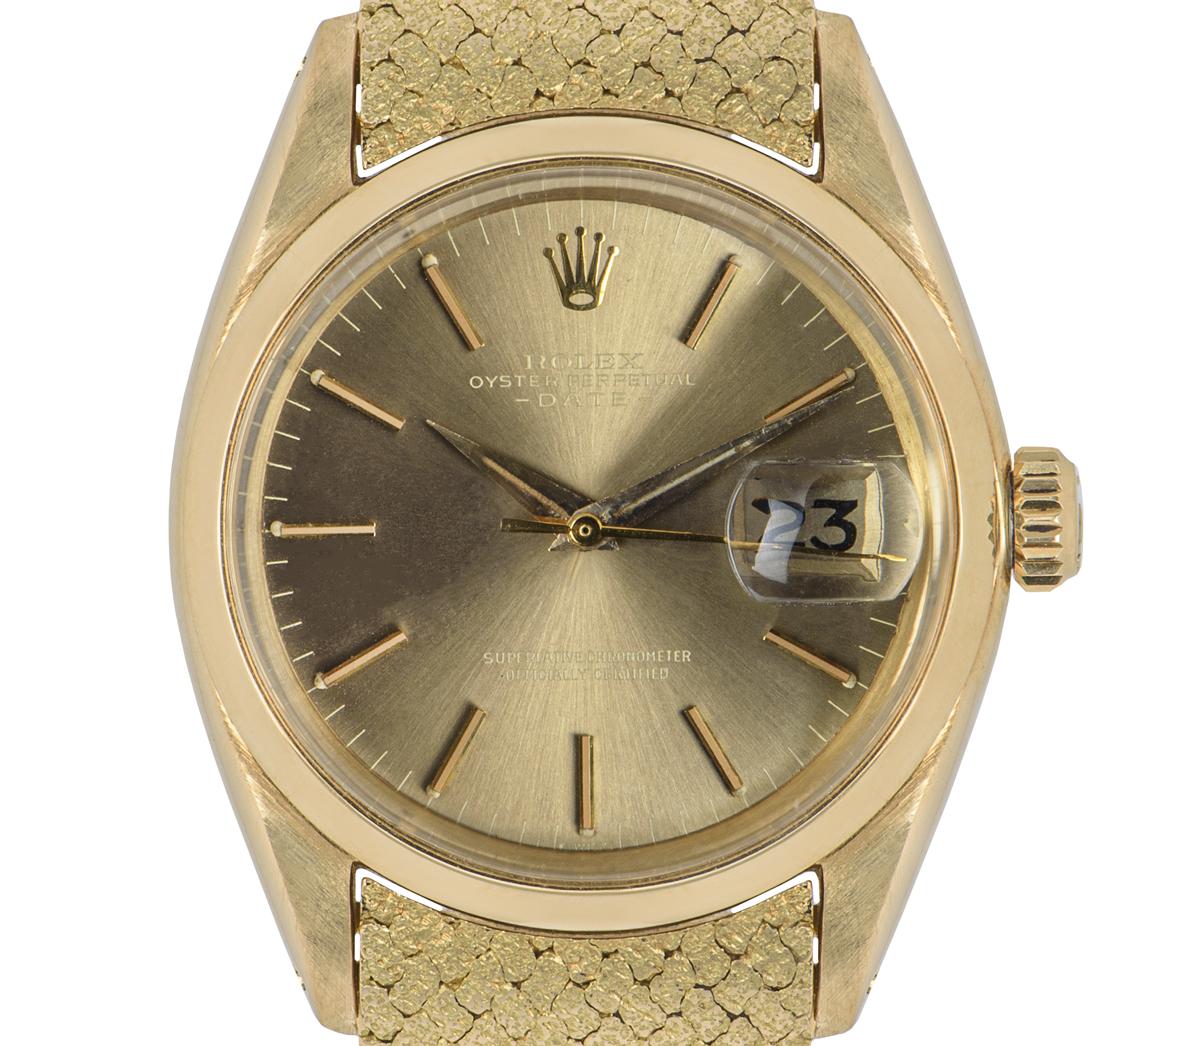 A rare vintage Date by Rolex, in yellow gold. Featuring a champagne dial with a smooth finish bezel. Equipped with a yellow gold bracelet and a rare hammered finish which is bound by a deployment clasp that has a raised monogram.

Fitted with a